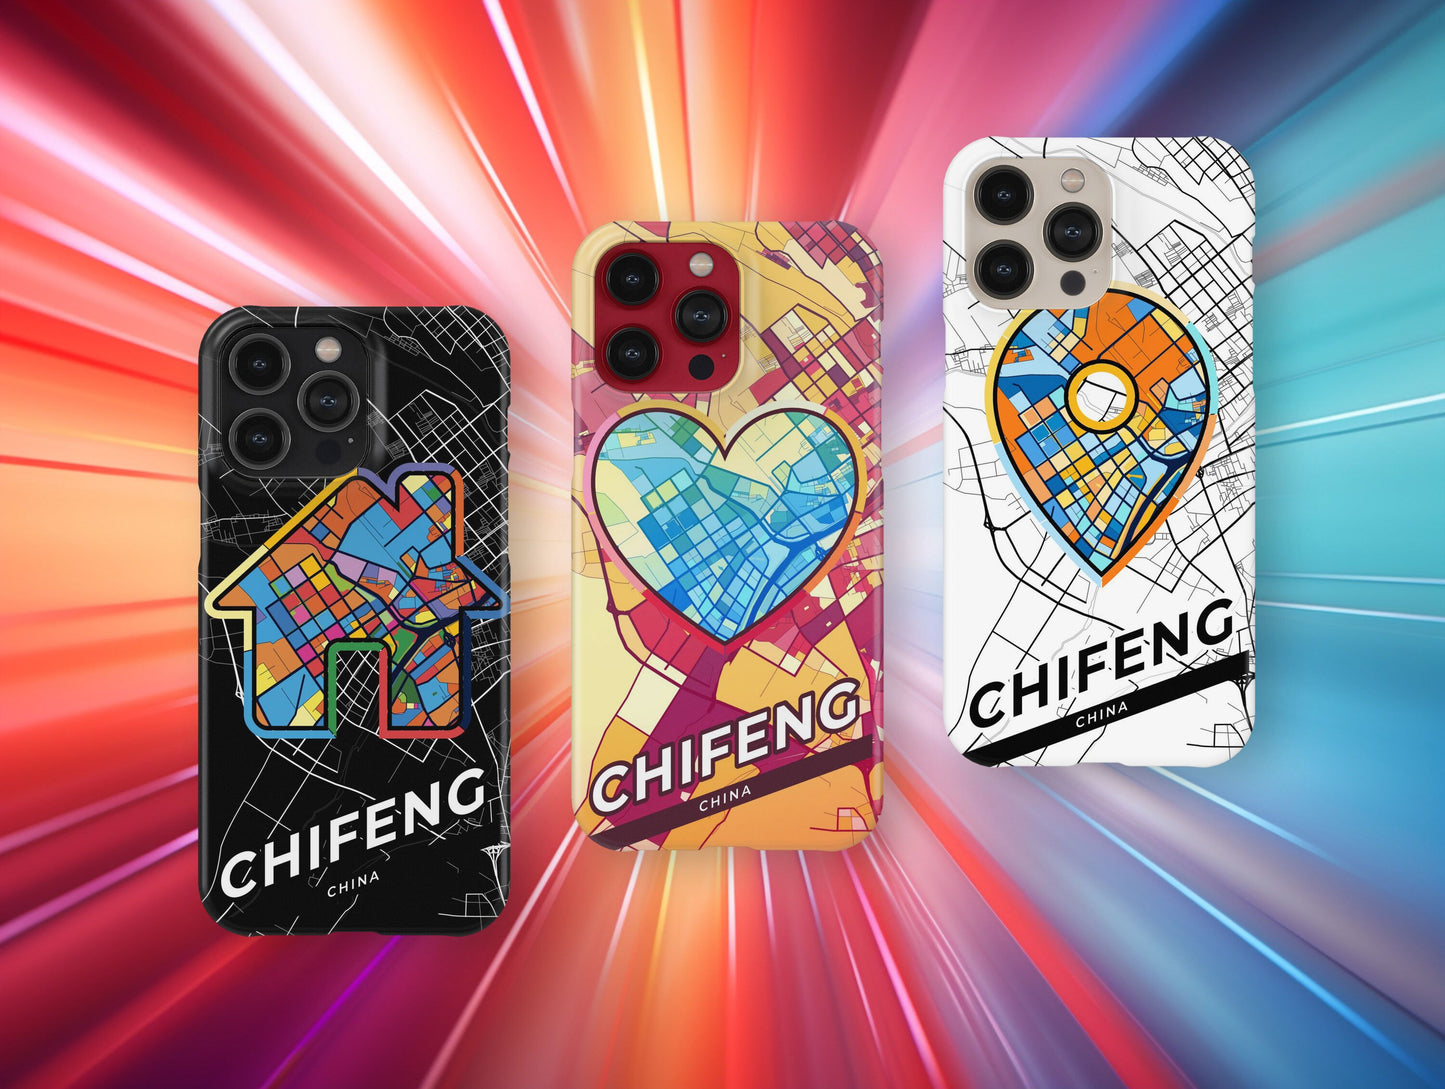 Chifeng China slim phone case with colorful icon. Birthday, wedding or housewarming gift. Couple match cases.